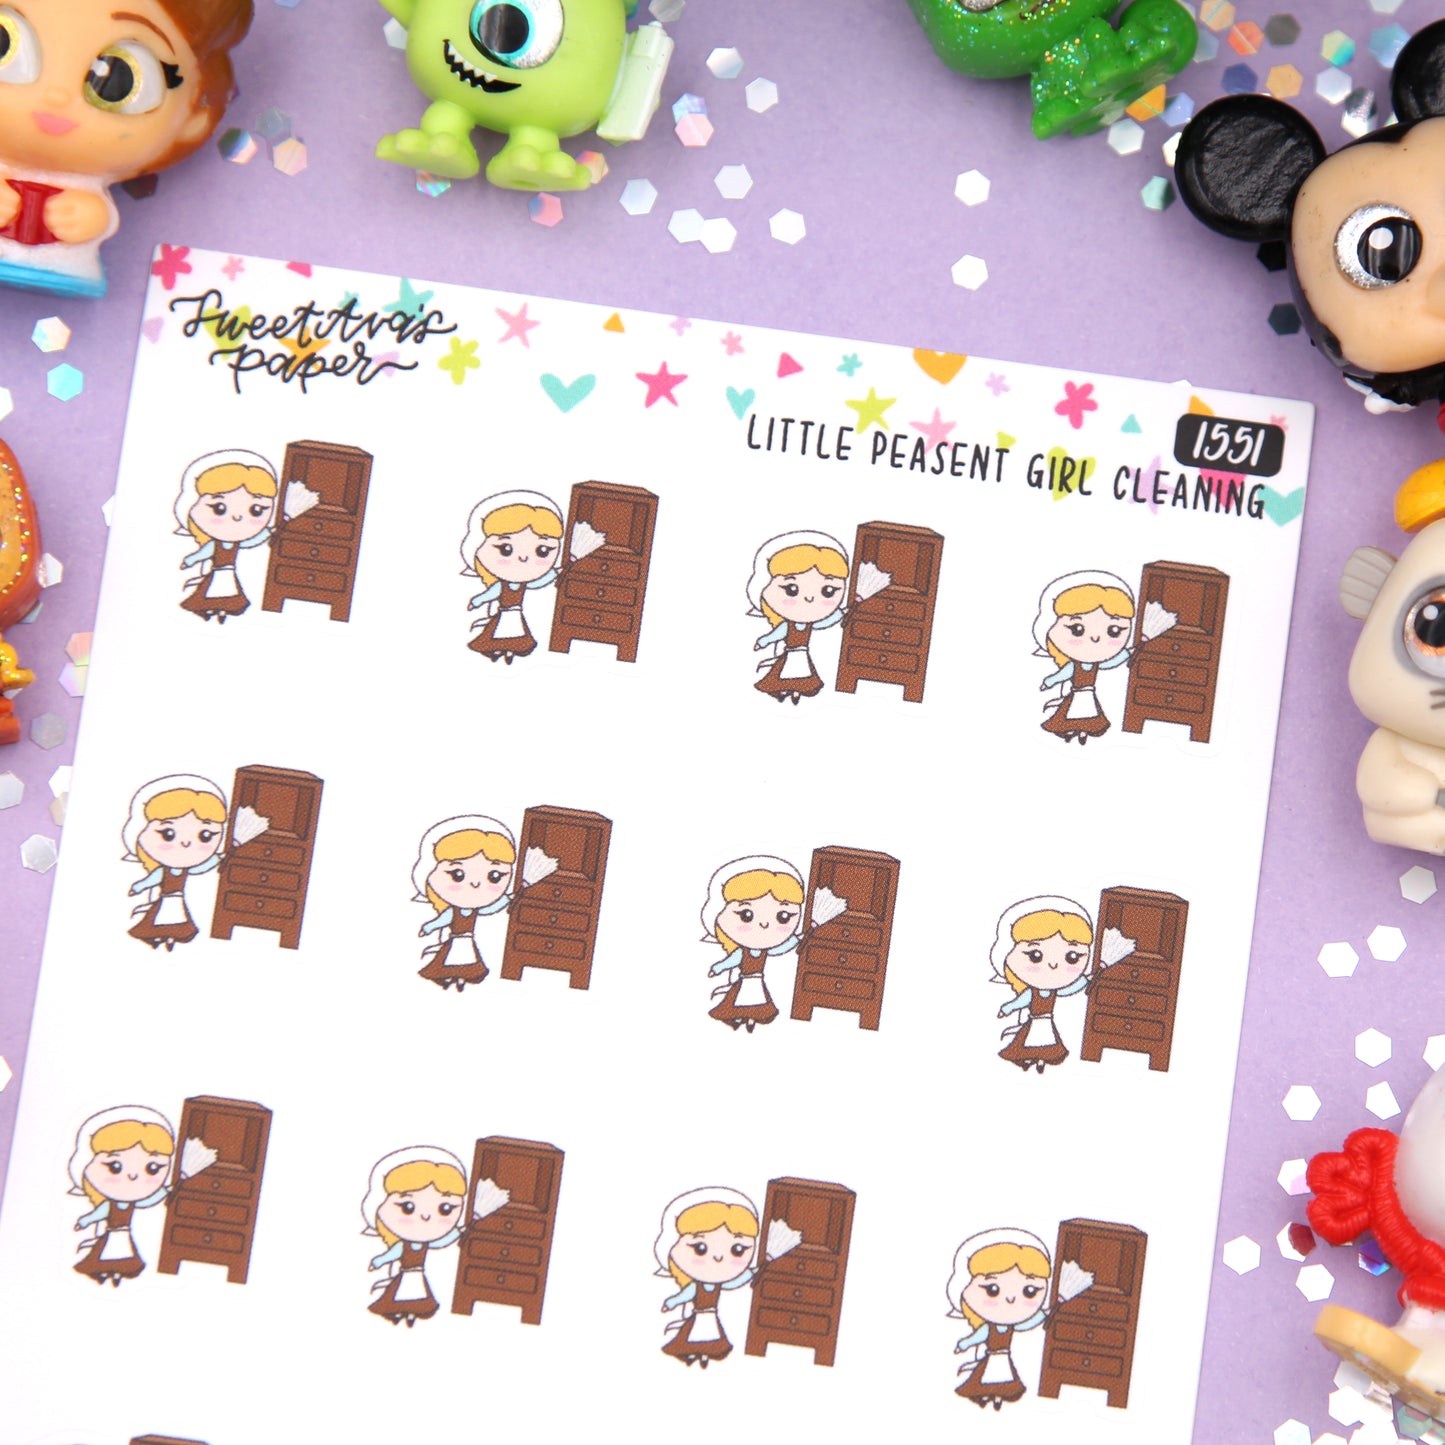 Peasent Girl Cleaning Planner Stickers - Magical Planner Stickers - Magical May - [1551]